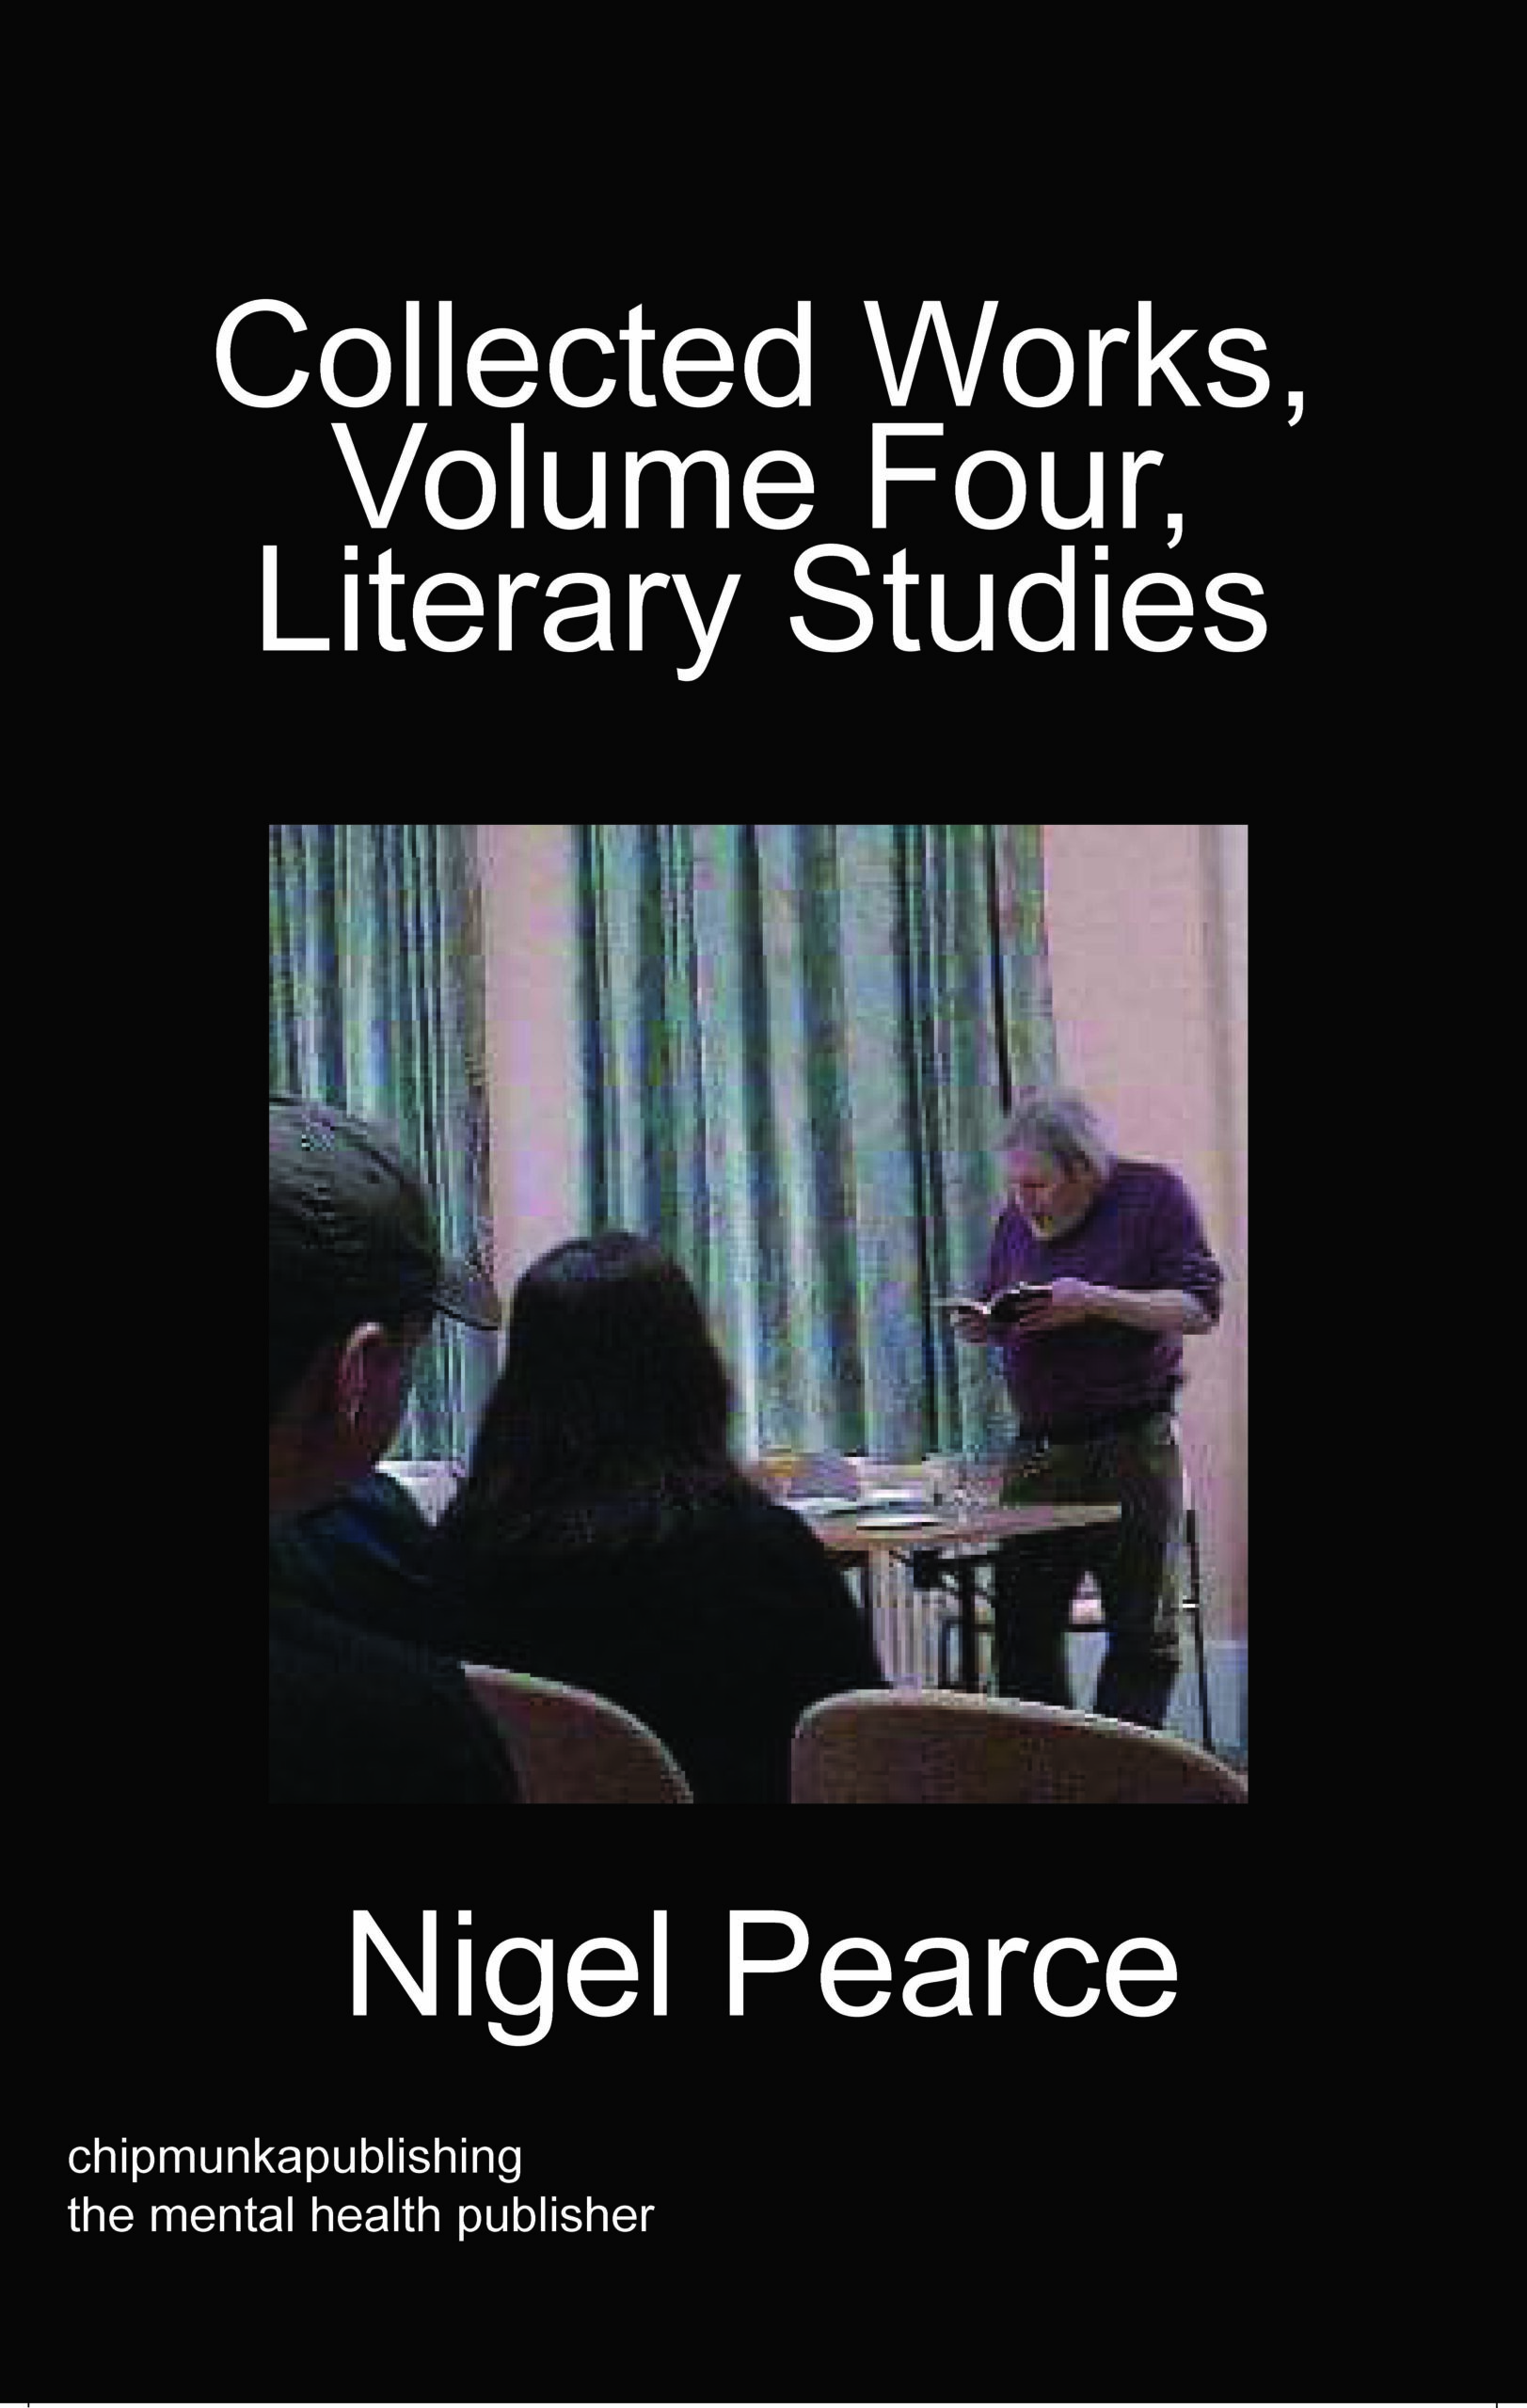 Collected Works, Volume Four, Literary Studies